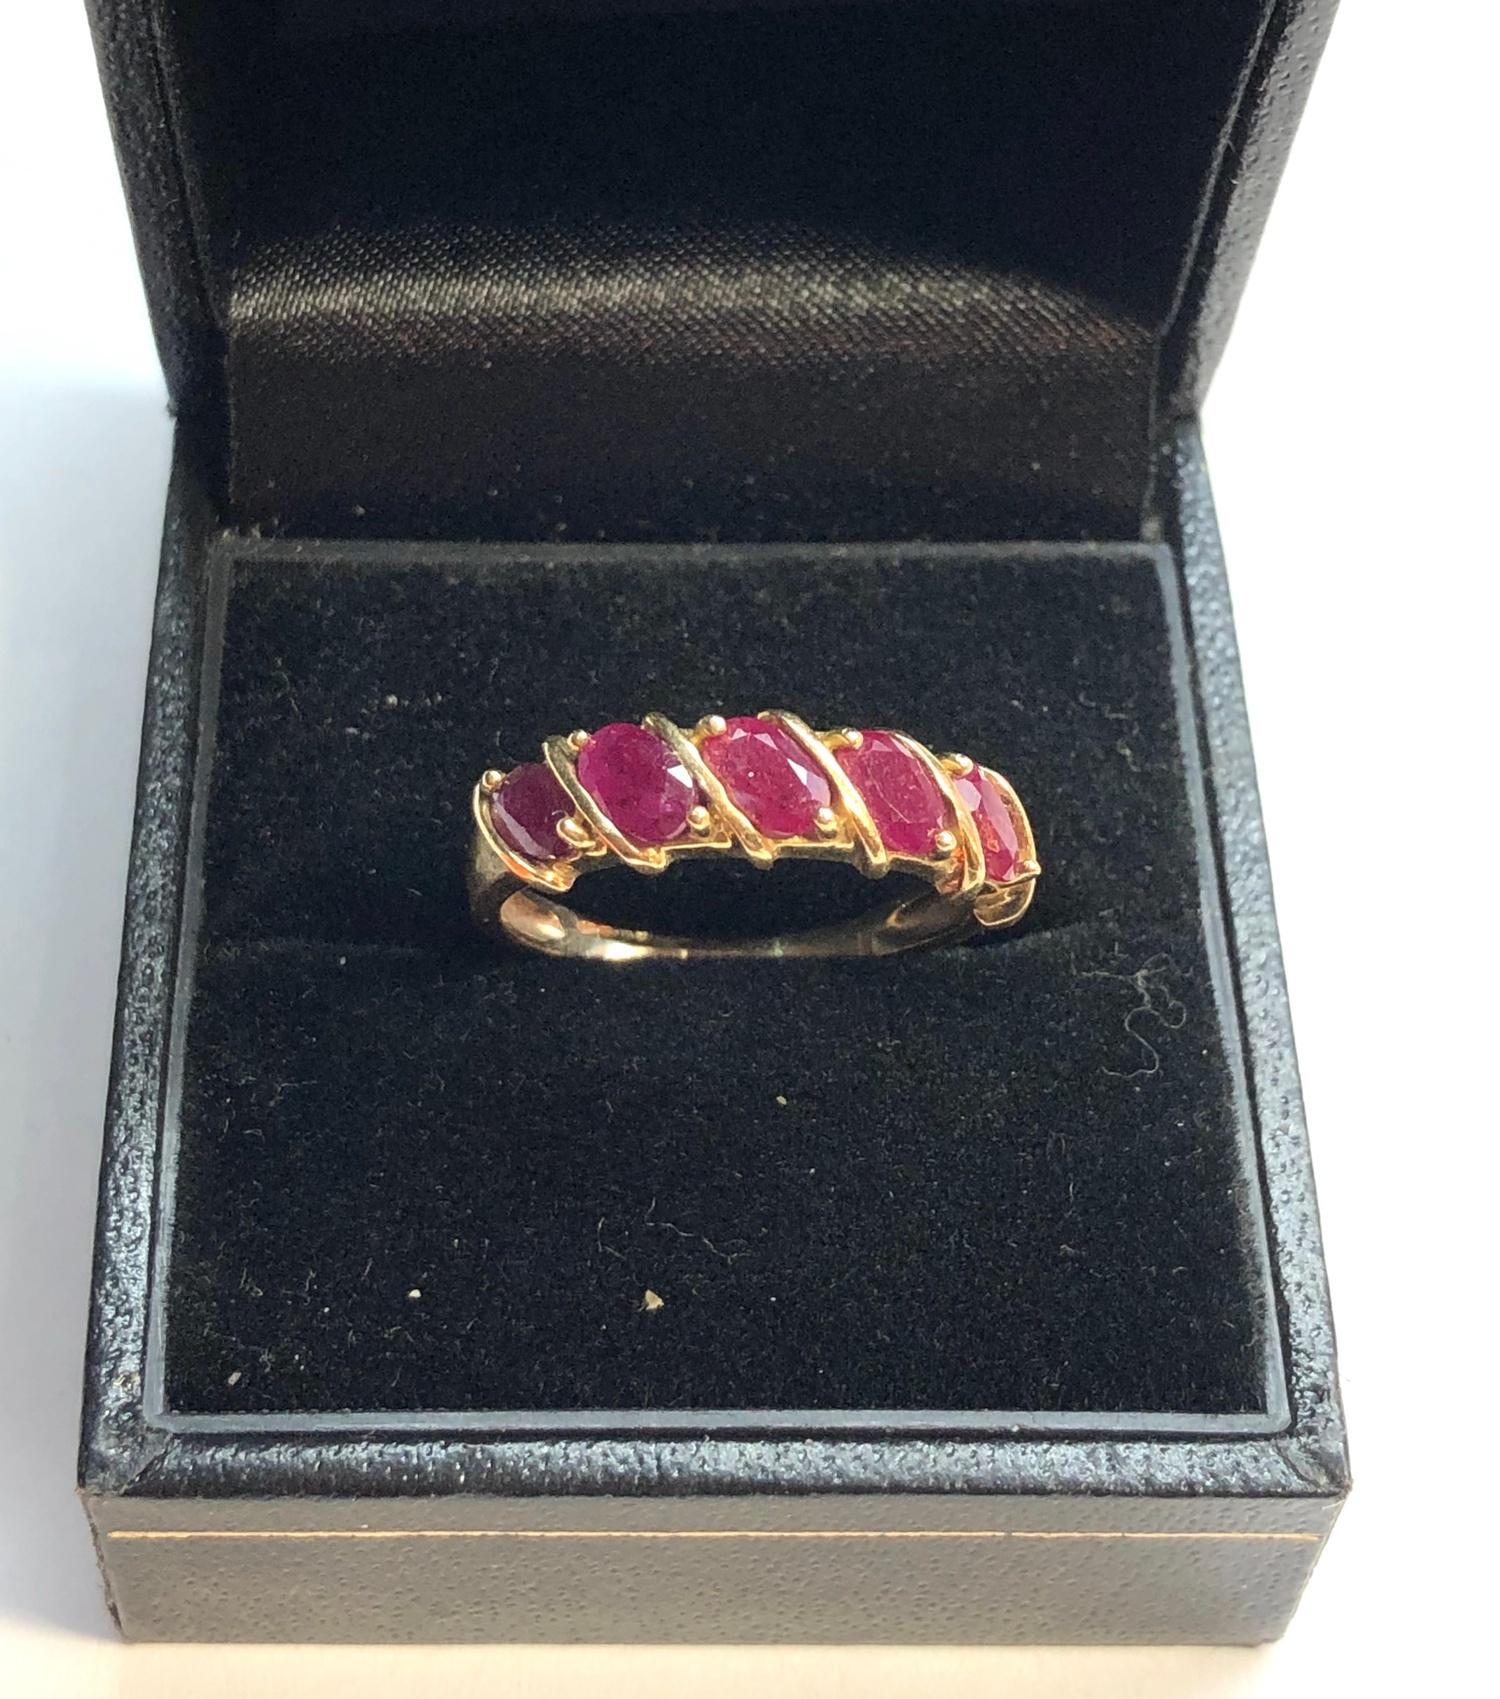 9ct Gold stone set dress ring weight 2.5, as shown condition